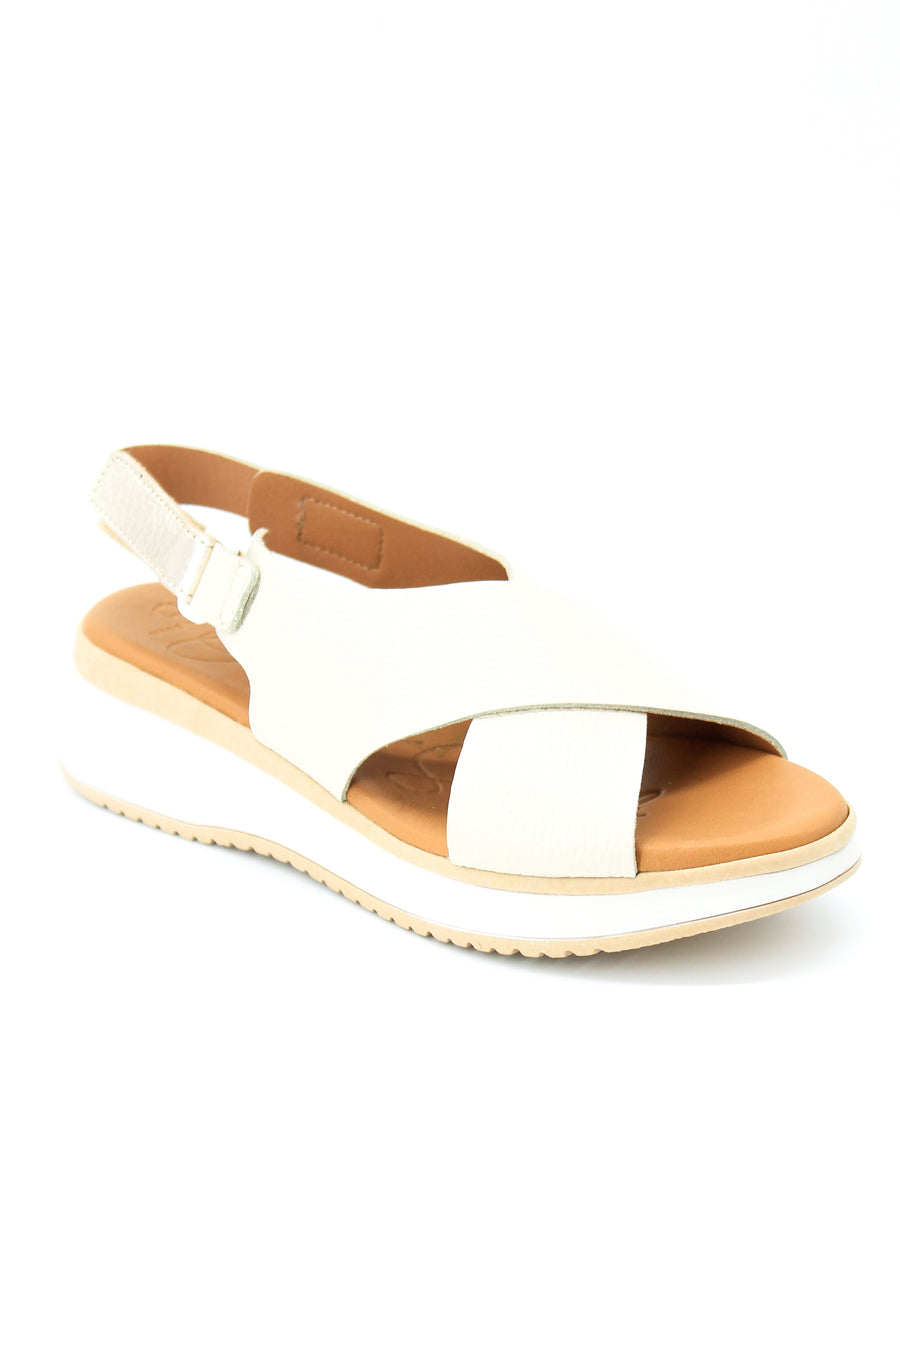 Oh My Sandals 5412 White